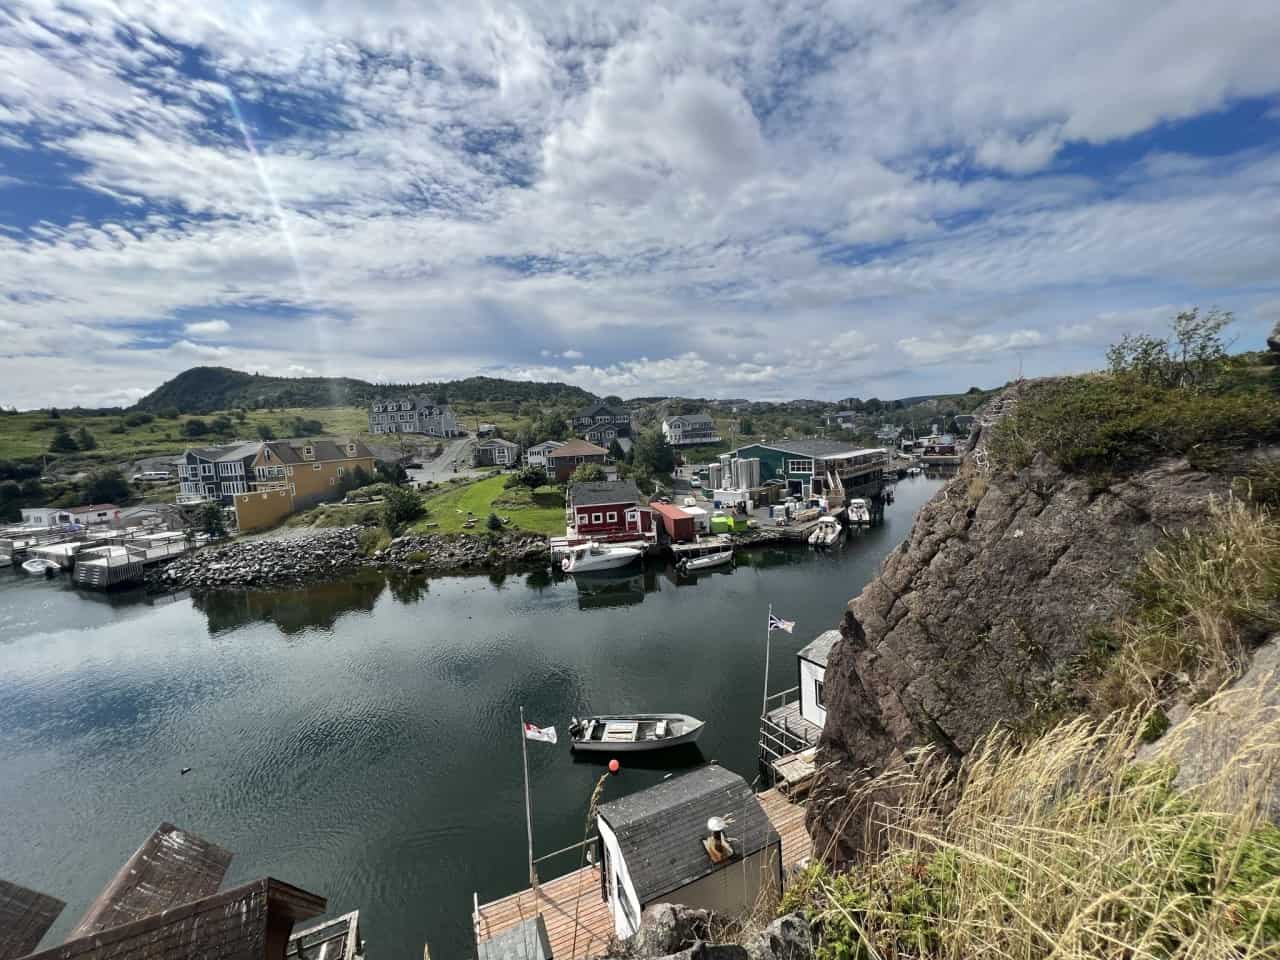 Quidi Vidi Village, Sugar Loaf Path, East Coast Trail, Newfoundland - The view from the trail overlooking Quidi Vidi Village shows local fishing huts that are still being used, local homes and the Quidi Vidi Brewery. The brewery is a great location for a refreshing drink at the end of the long hike. In the summertime there are also various food trucks and a beer tent on The Wharf. 